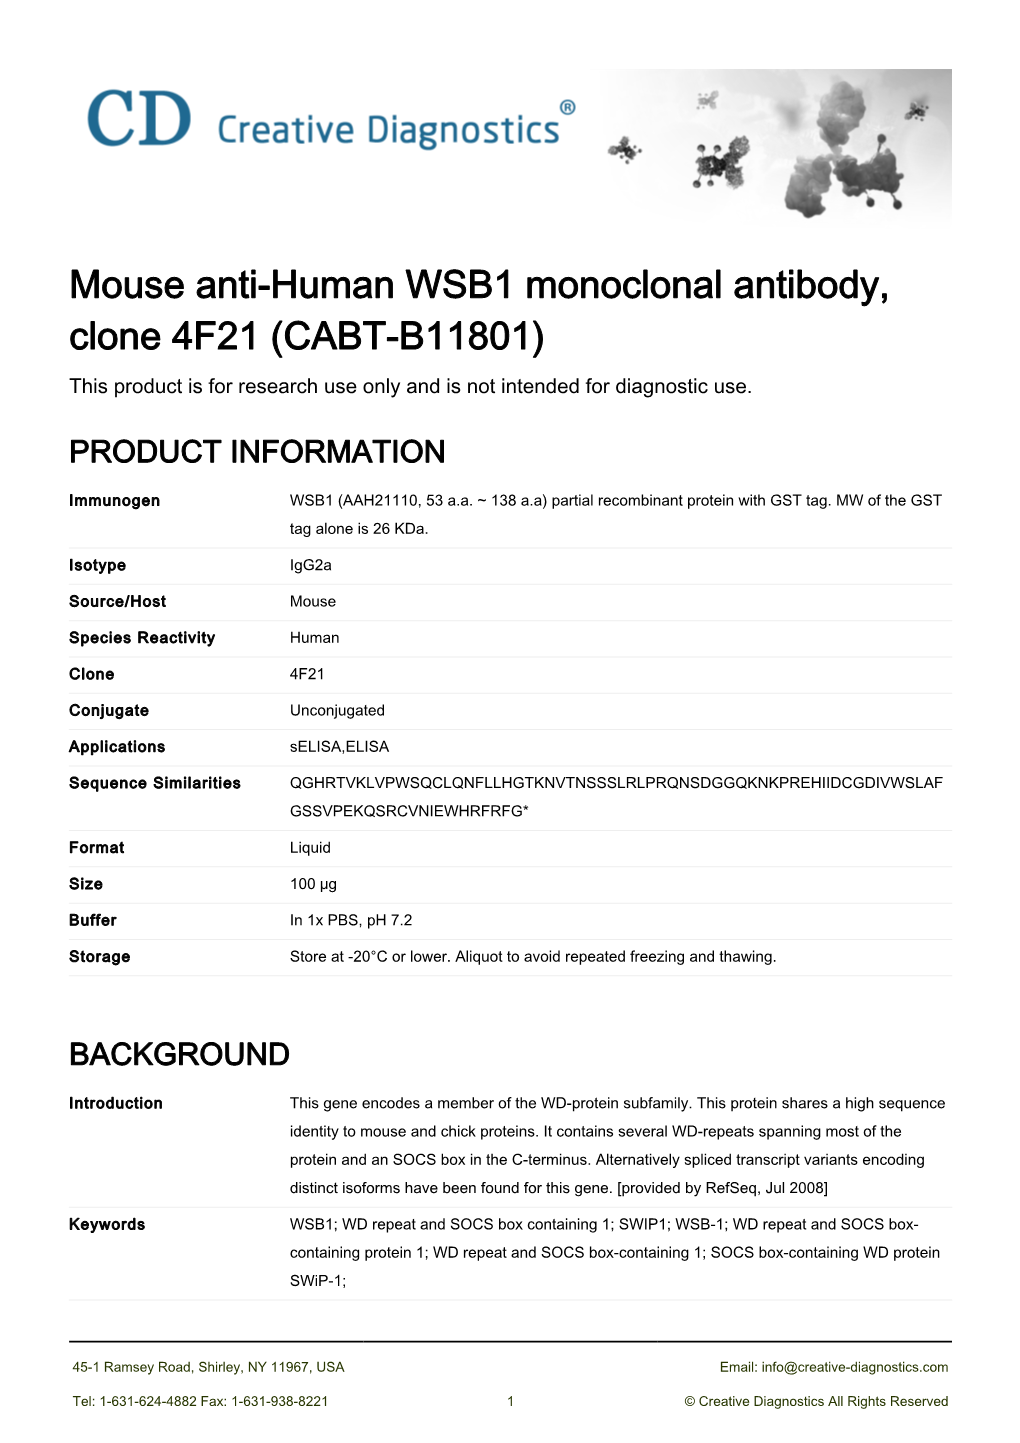 Mouse Anti-Human WSB1 Monoclonal Antibody, Clone 4F21 (CABT-B11801) This Product Is for Research Use Only and Is Not Intended for Diagnostic Use